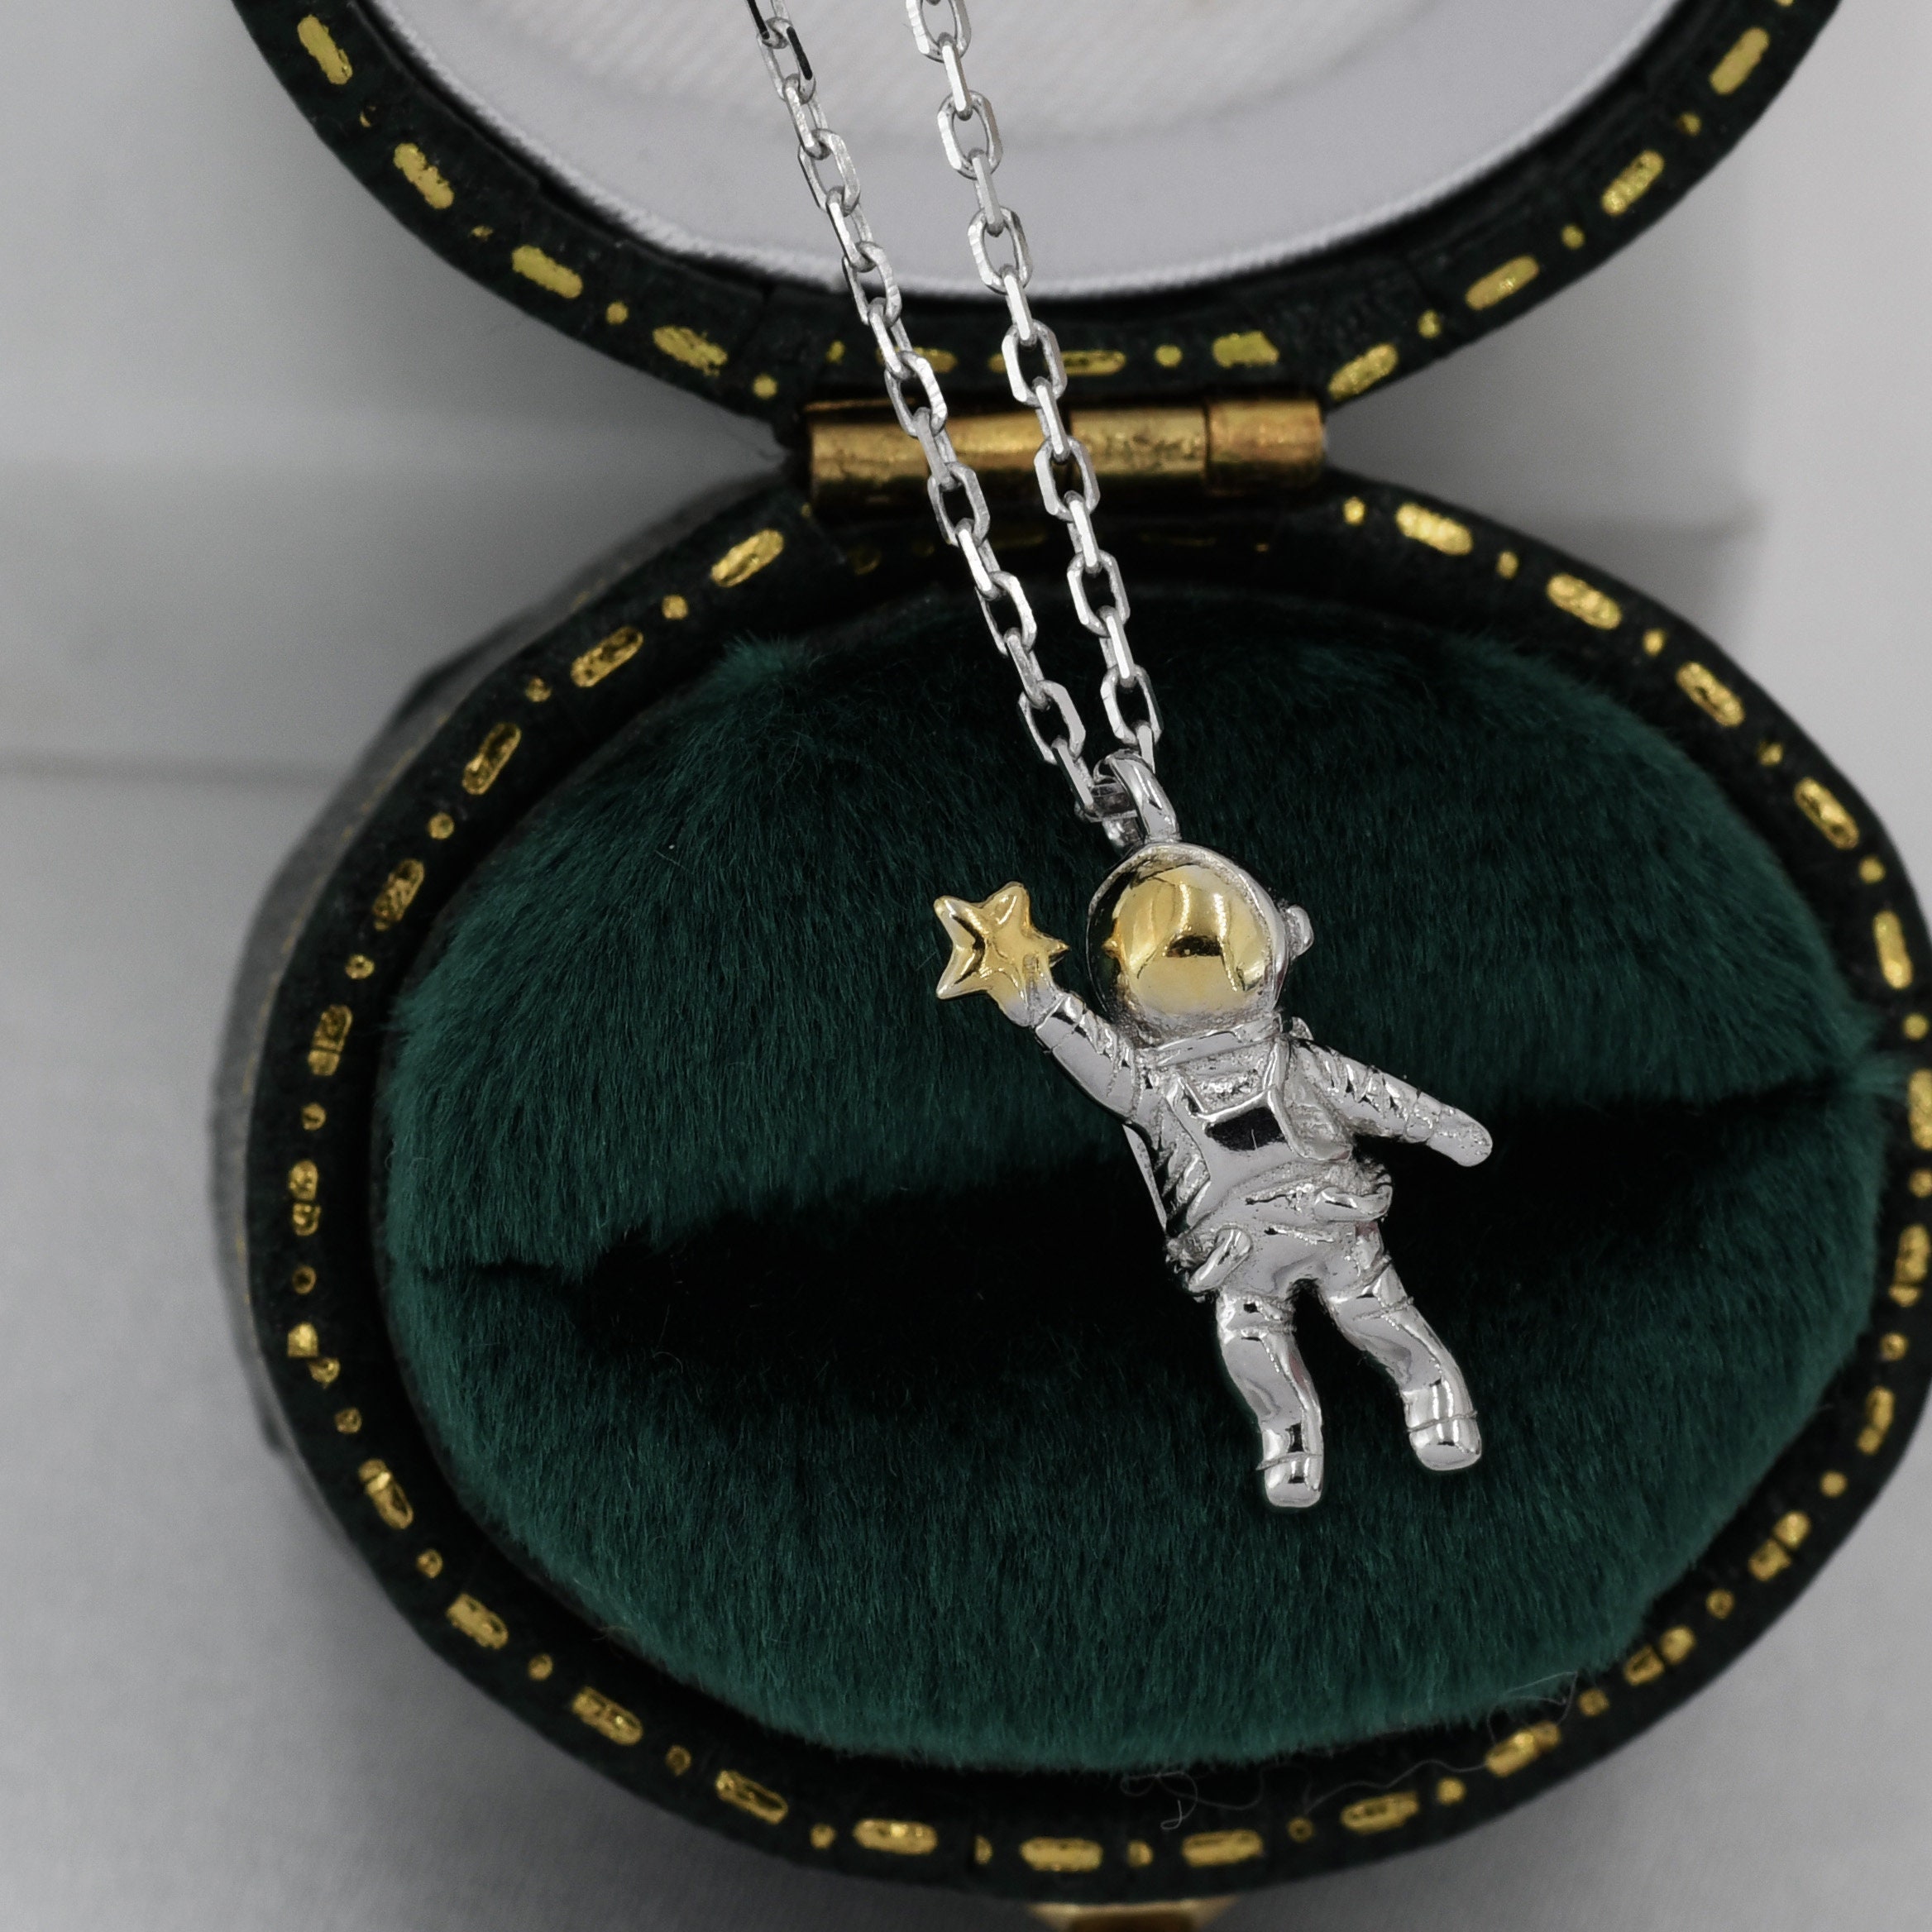 Personalized Astronaut and Planet Necklace for Couples